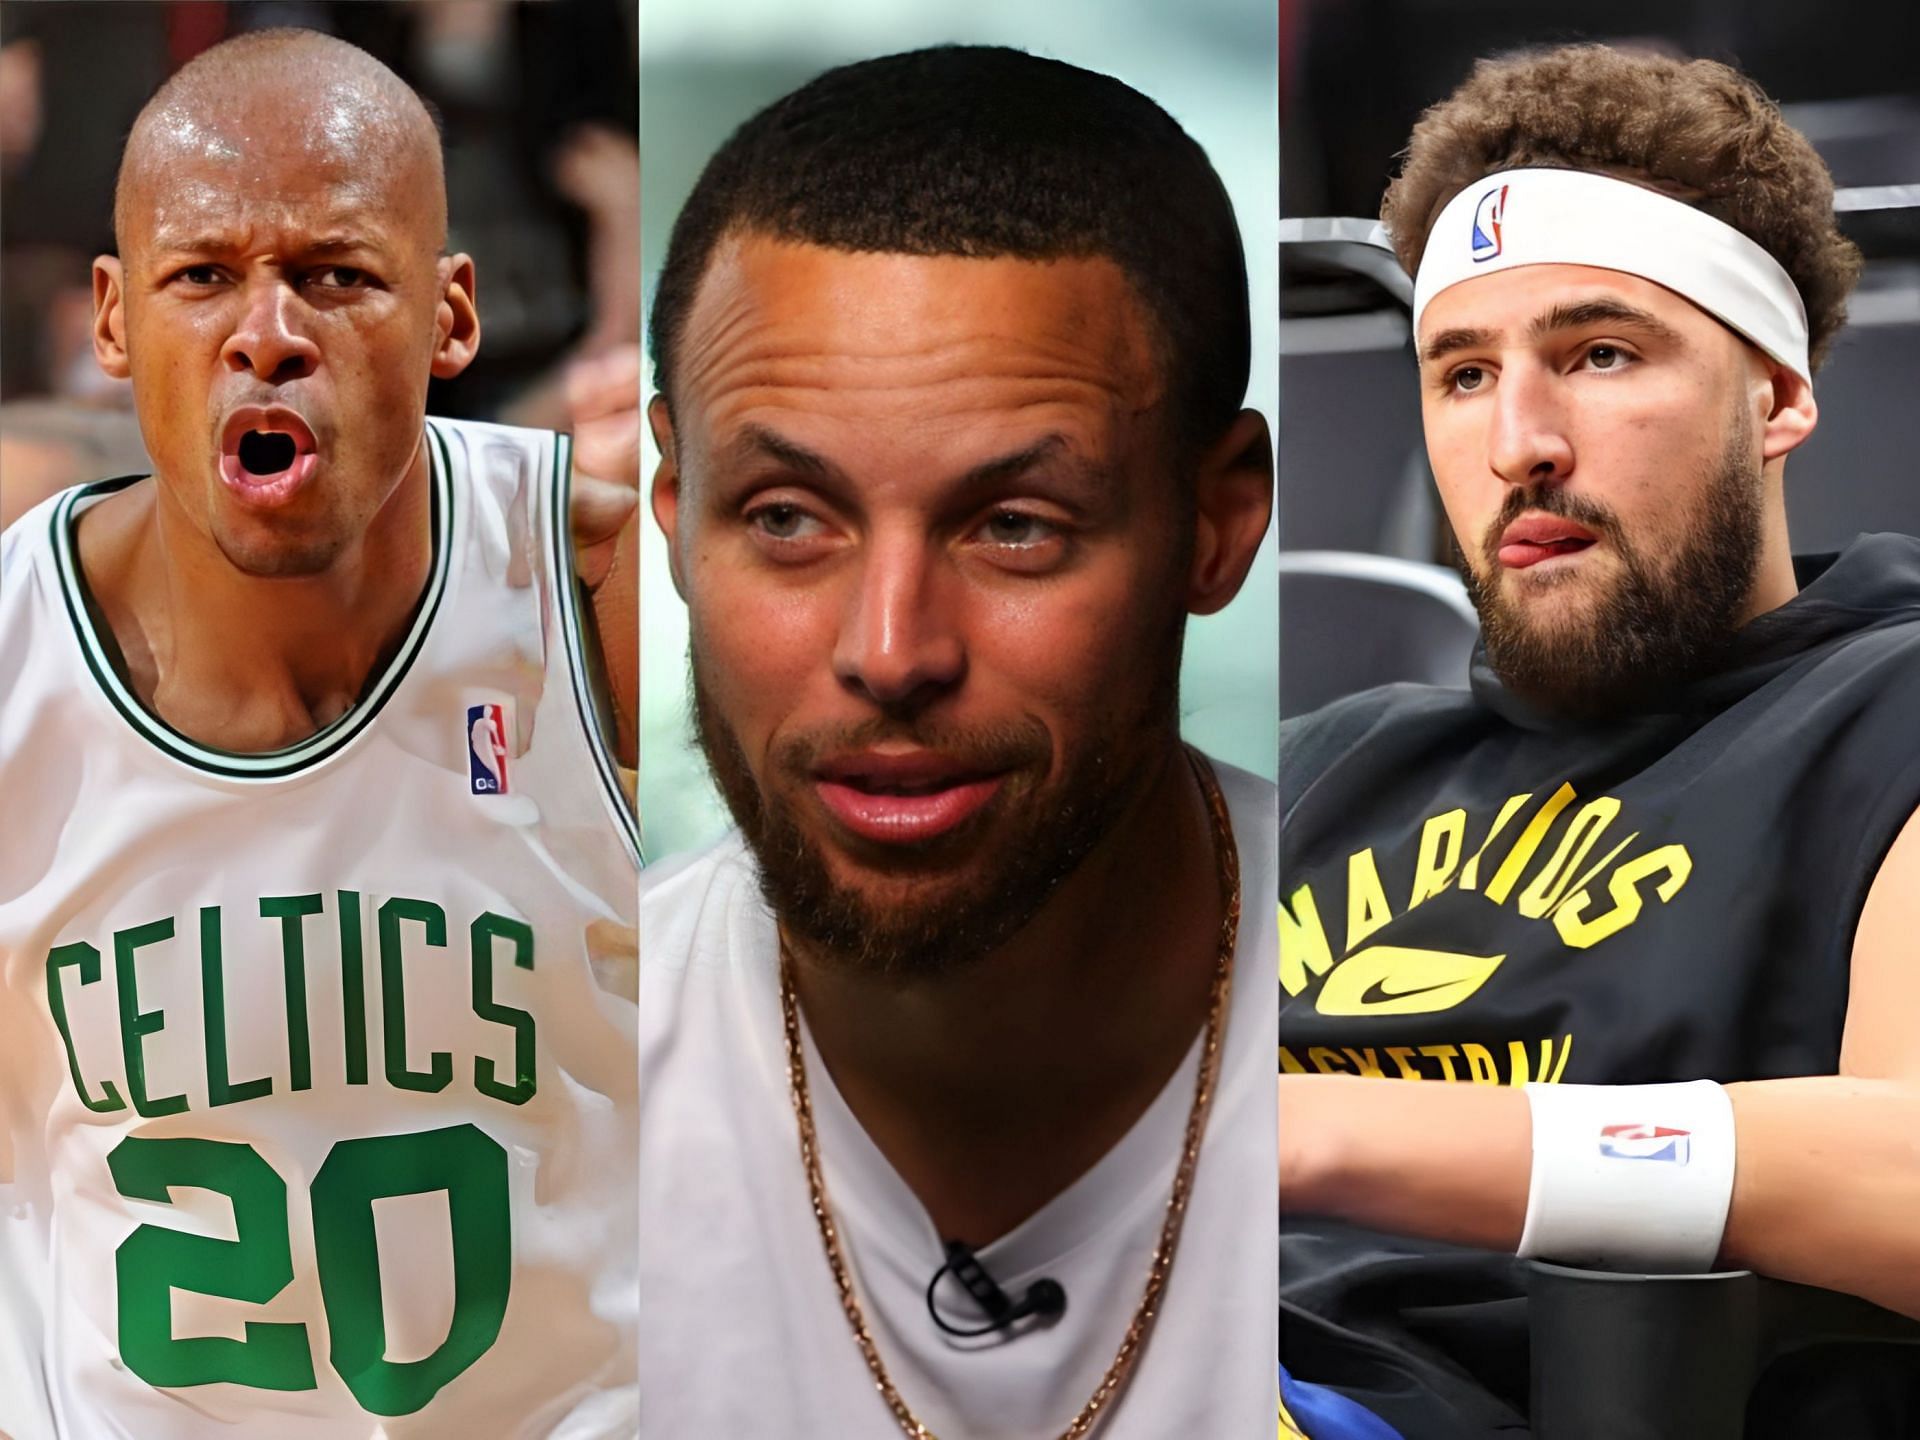 Boston Celtics legend Ray Allen and Golden State Warriors stars Steph Curry and Klay Thompson